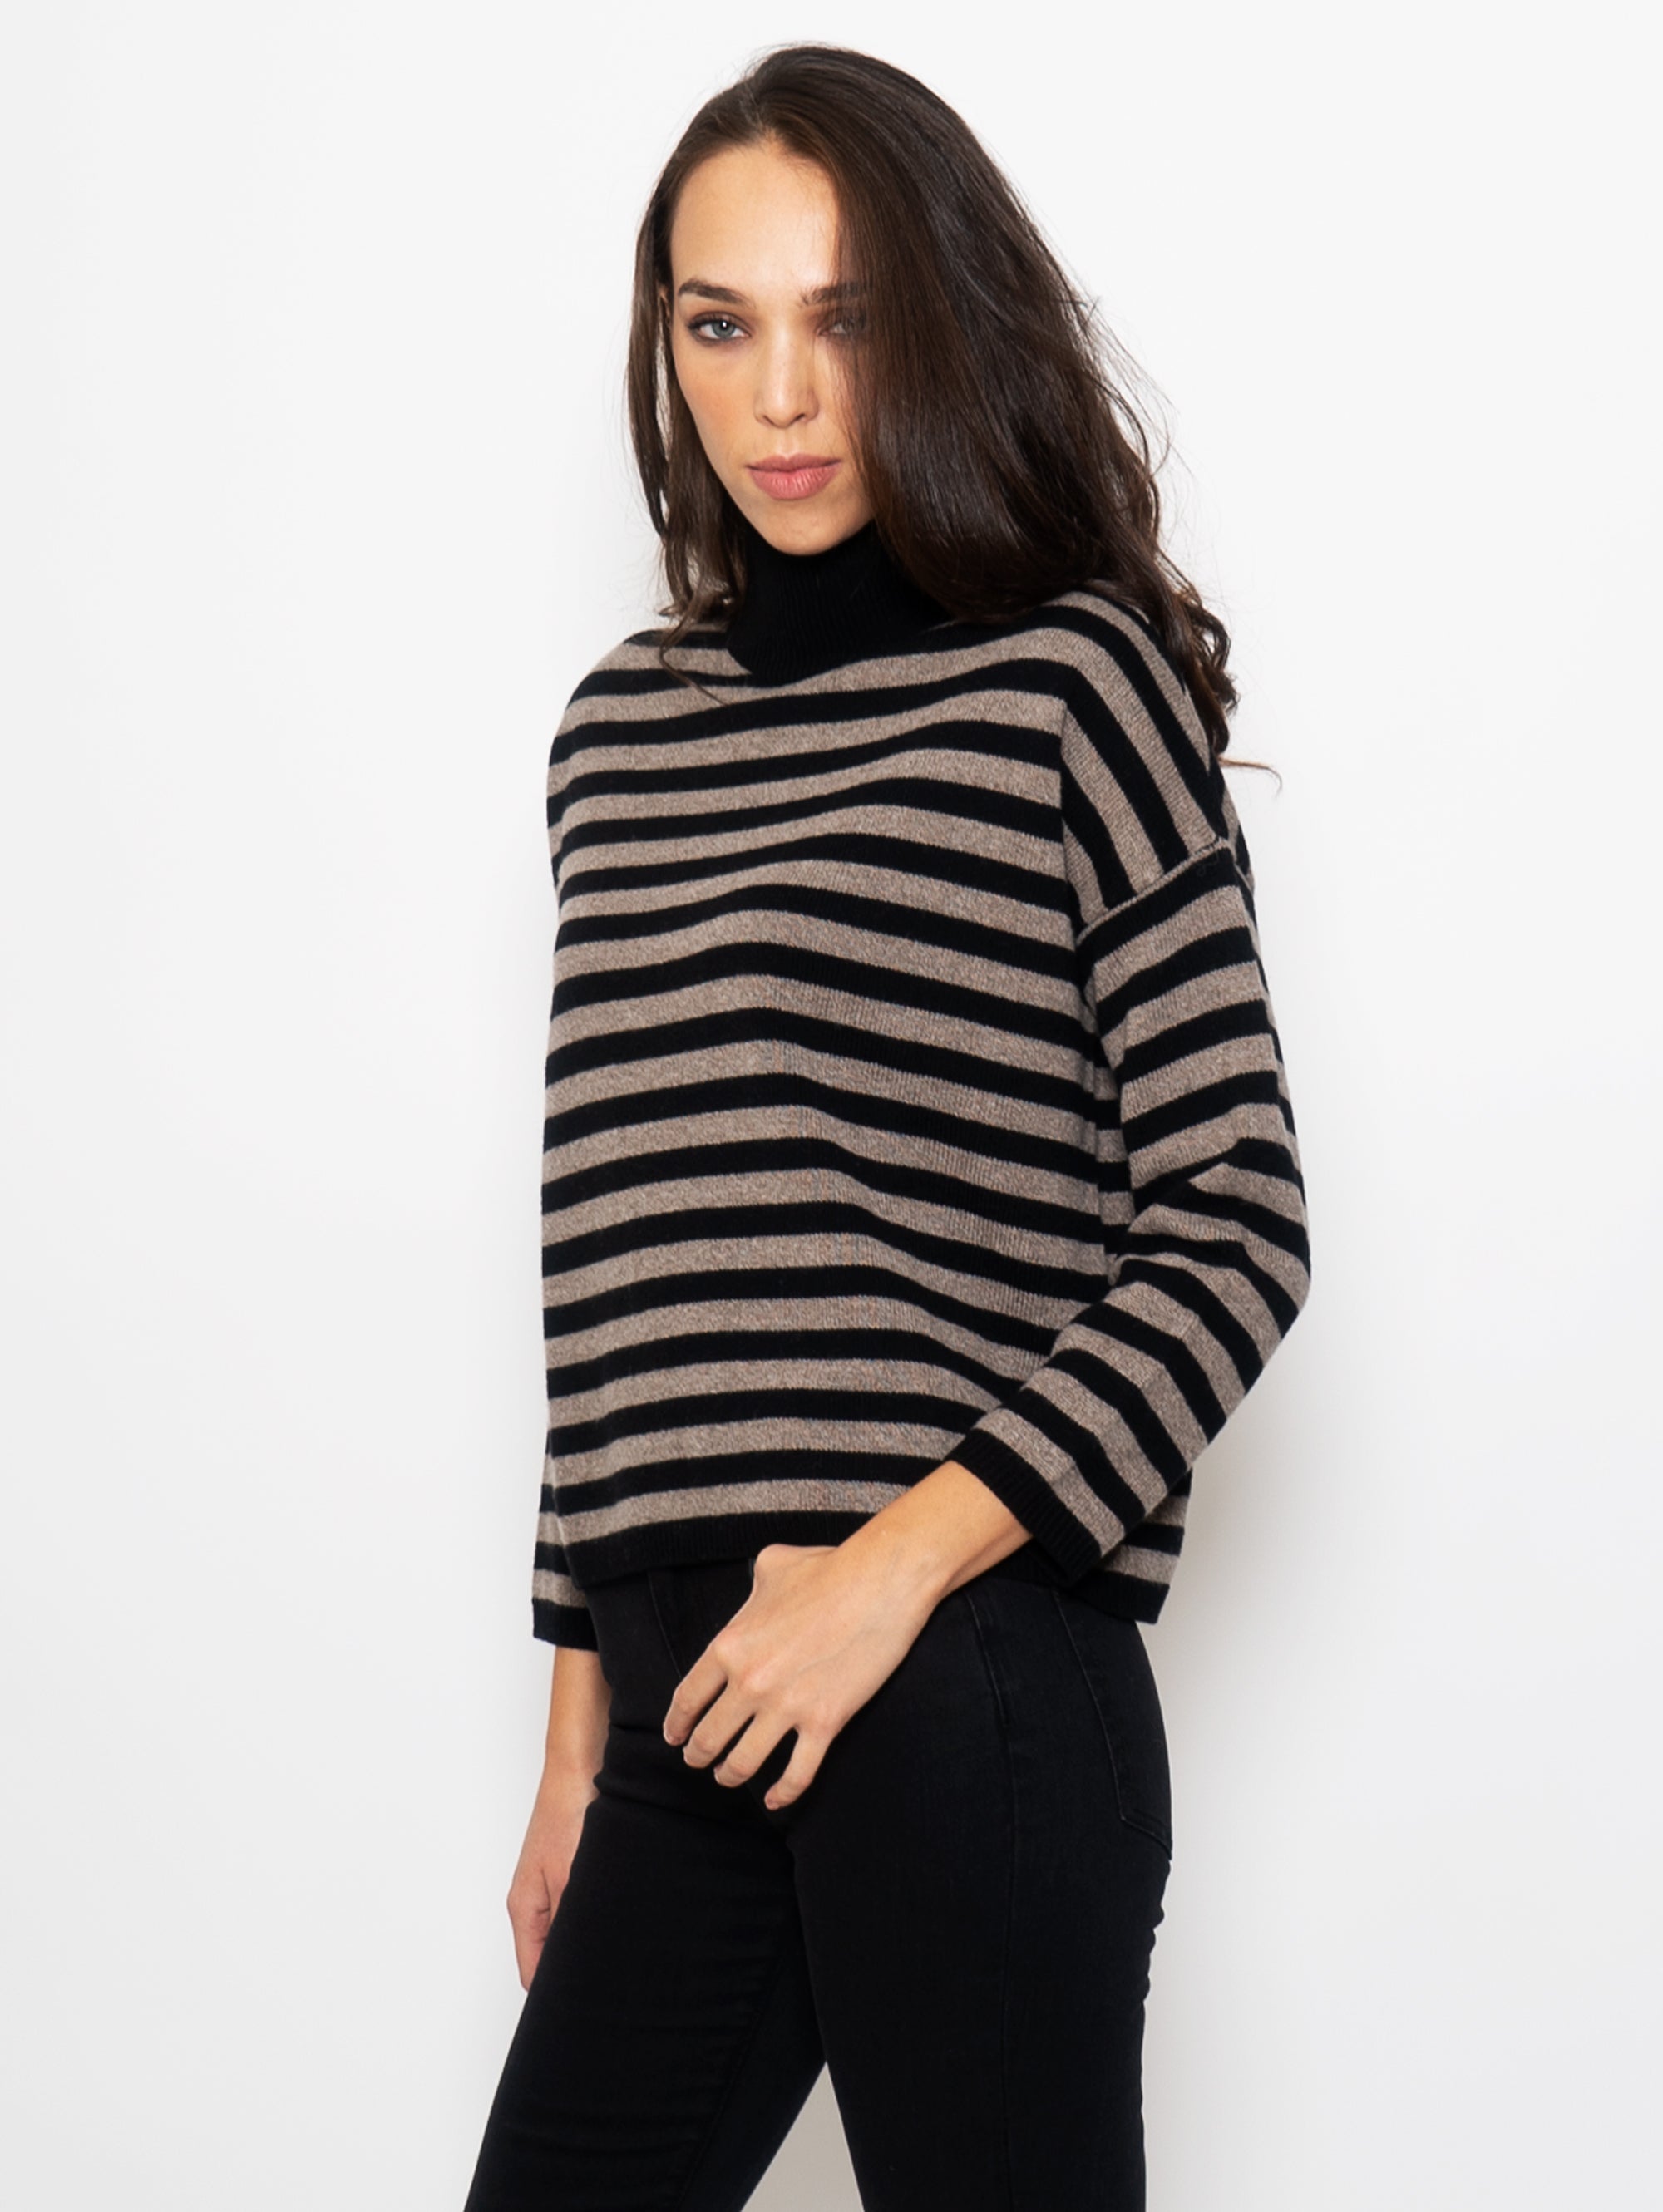 Striped Sweater with High Collar Black / Brown